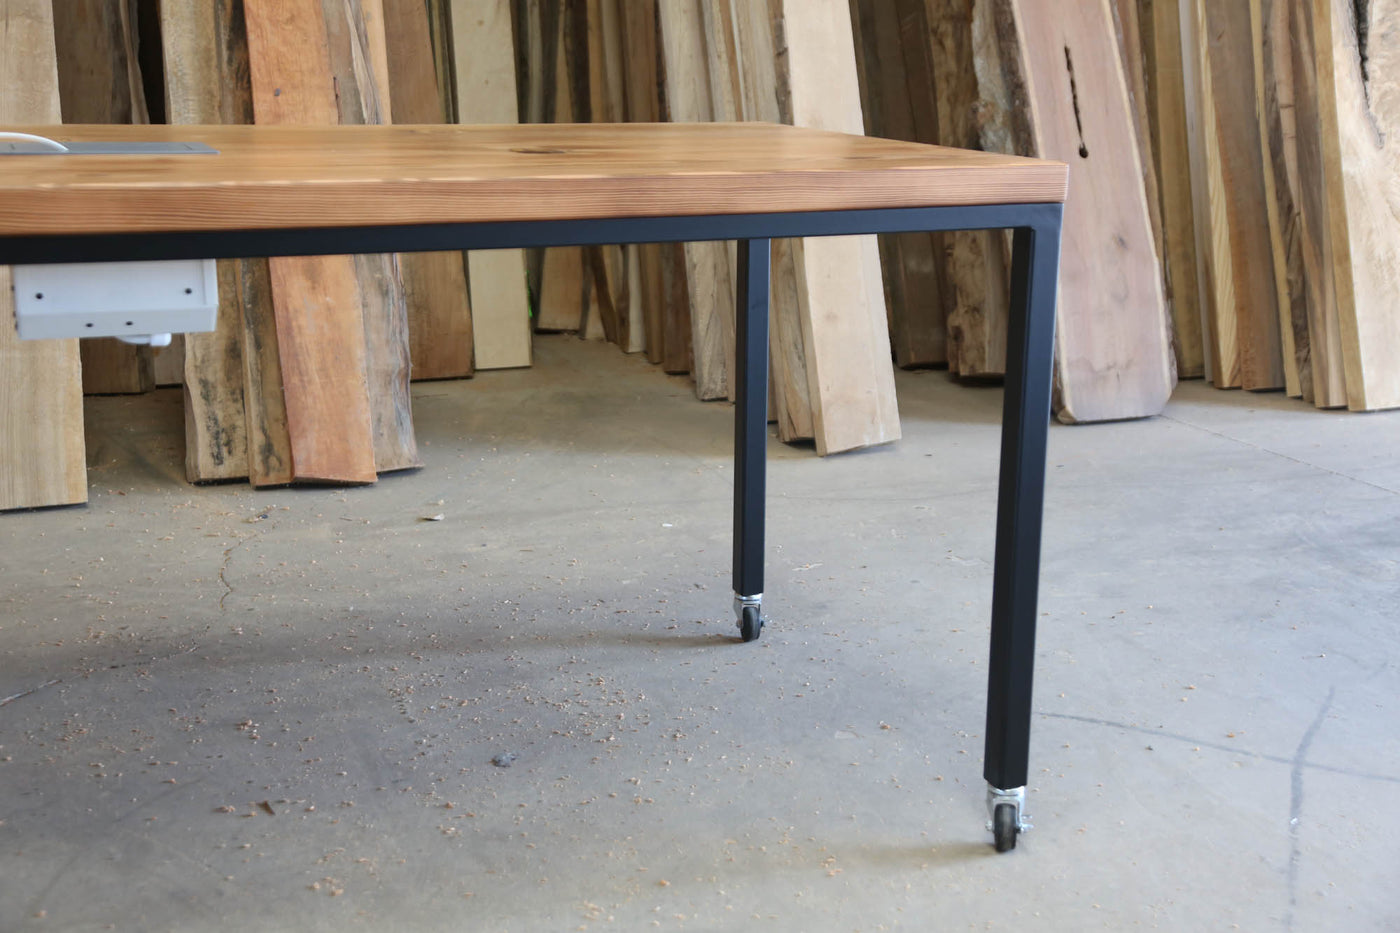 The Alan Dining Table - Parkman Woodworks Store